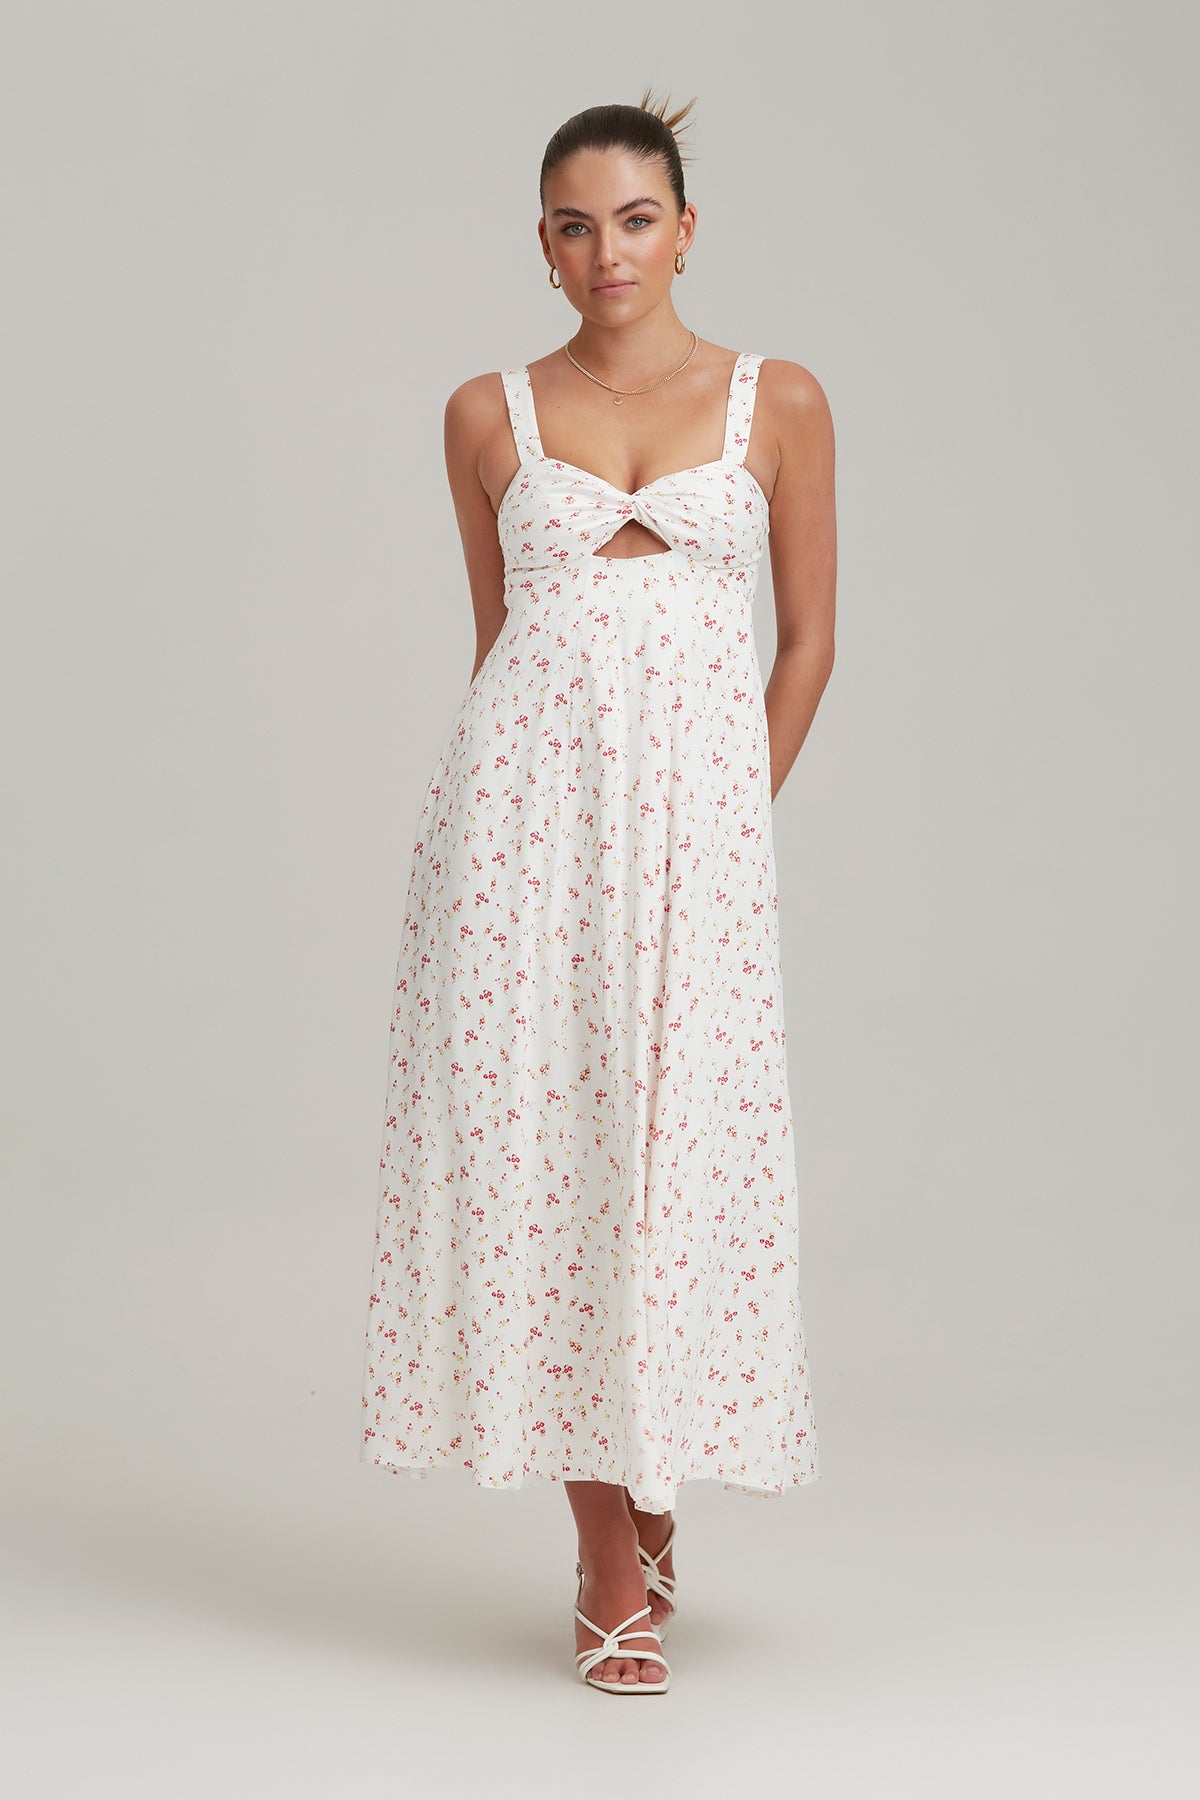 Lucky Brand Dress Sienna XL – Finders Keepers